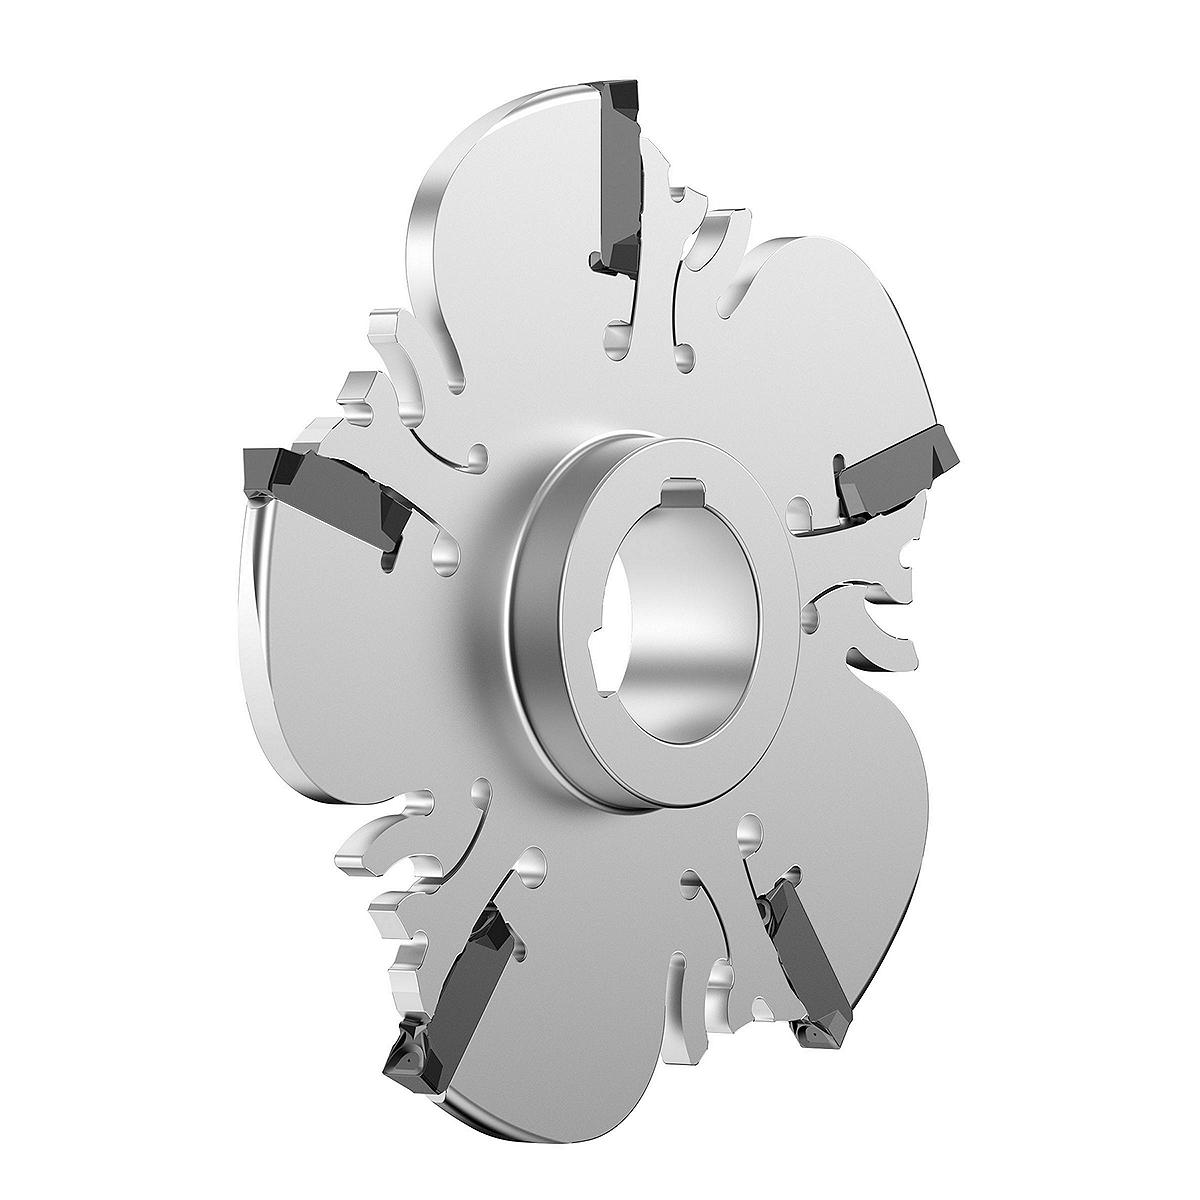 Slot milling cutter for multiple materials.